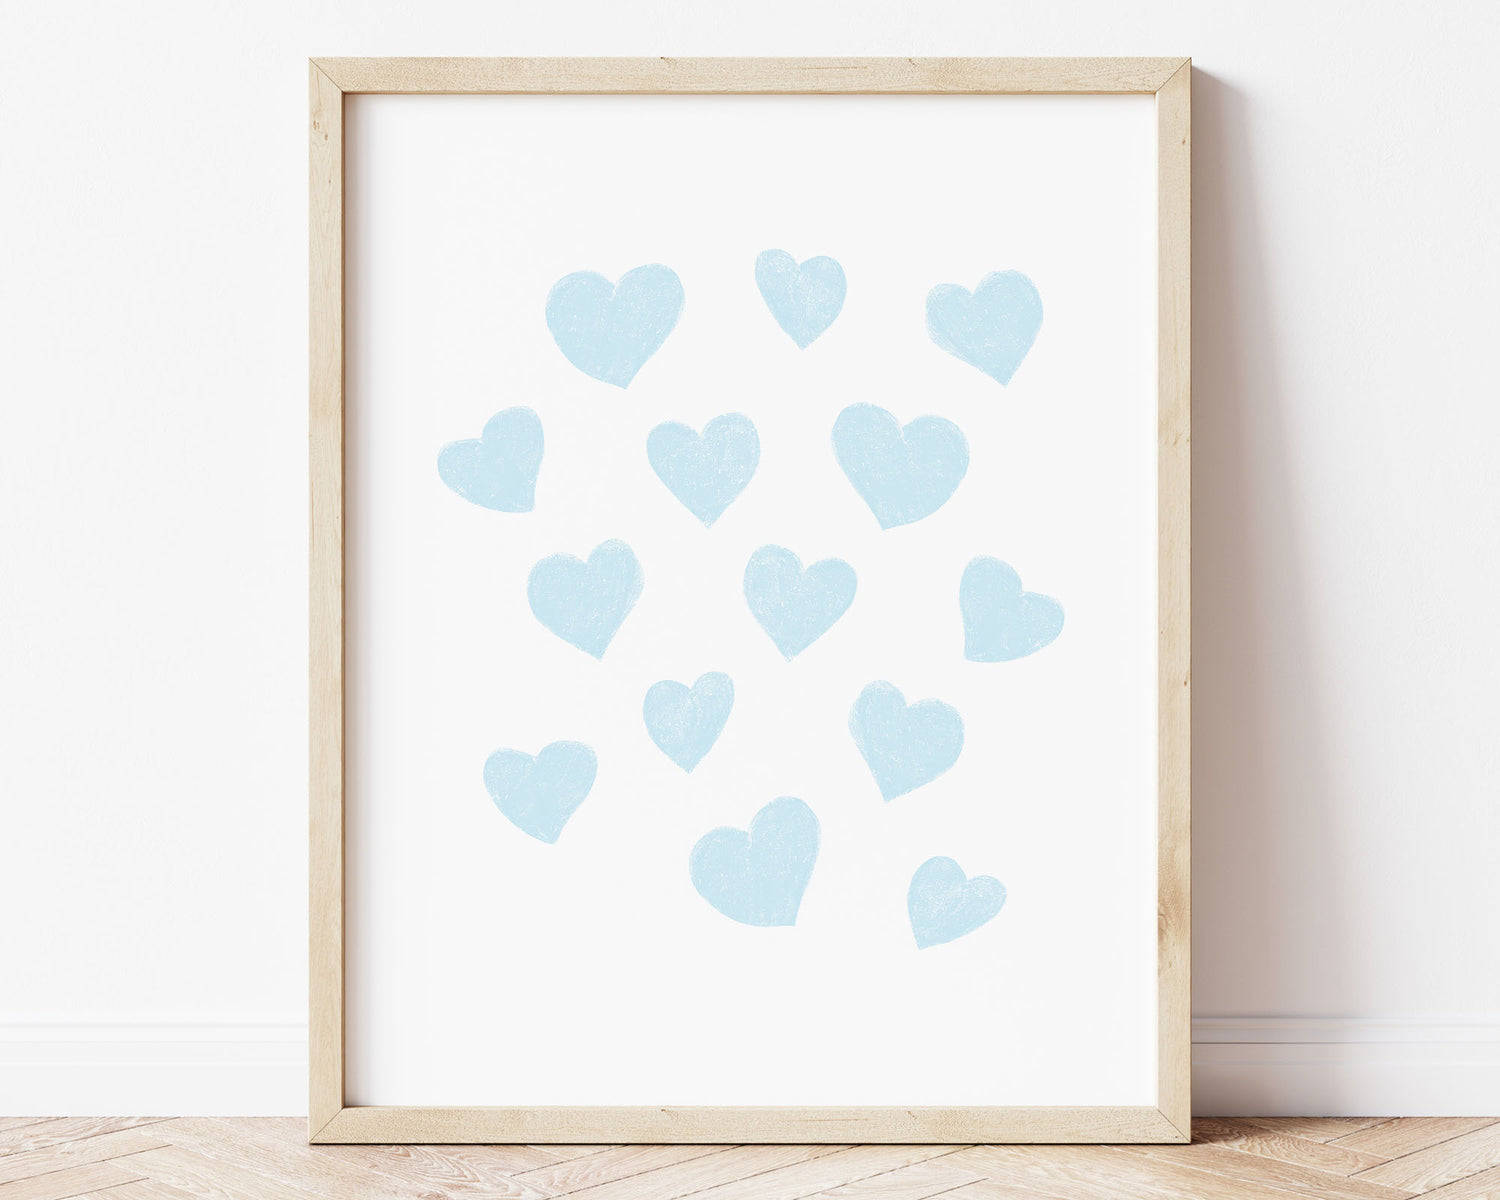 Baby blue small scattered hearts in chalky brushstroke illlustration style perfect for Baby Nursery Décor, Little Boys Bedroom Wall Art, Toddler Girls Room Wall Hangings, Kiddos Bathroom Wall Art and Childrens Playroom Décor.